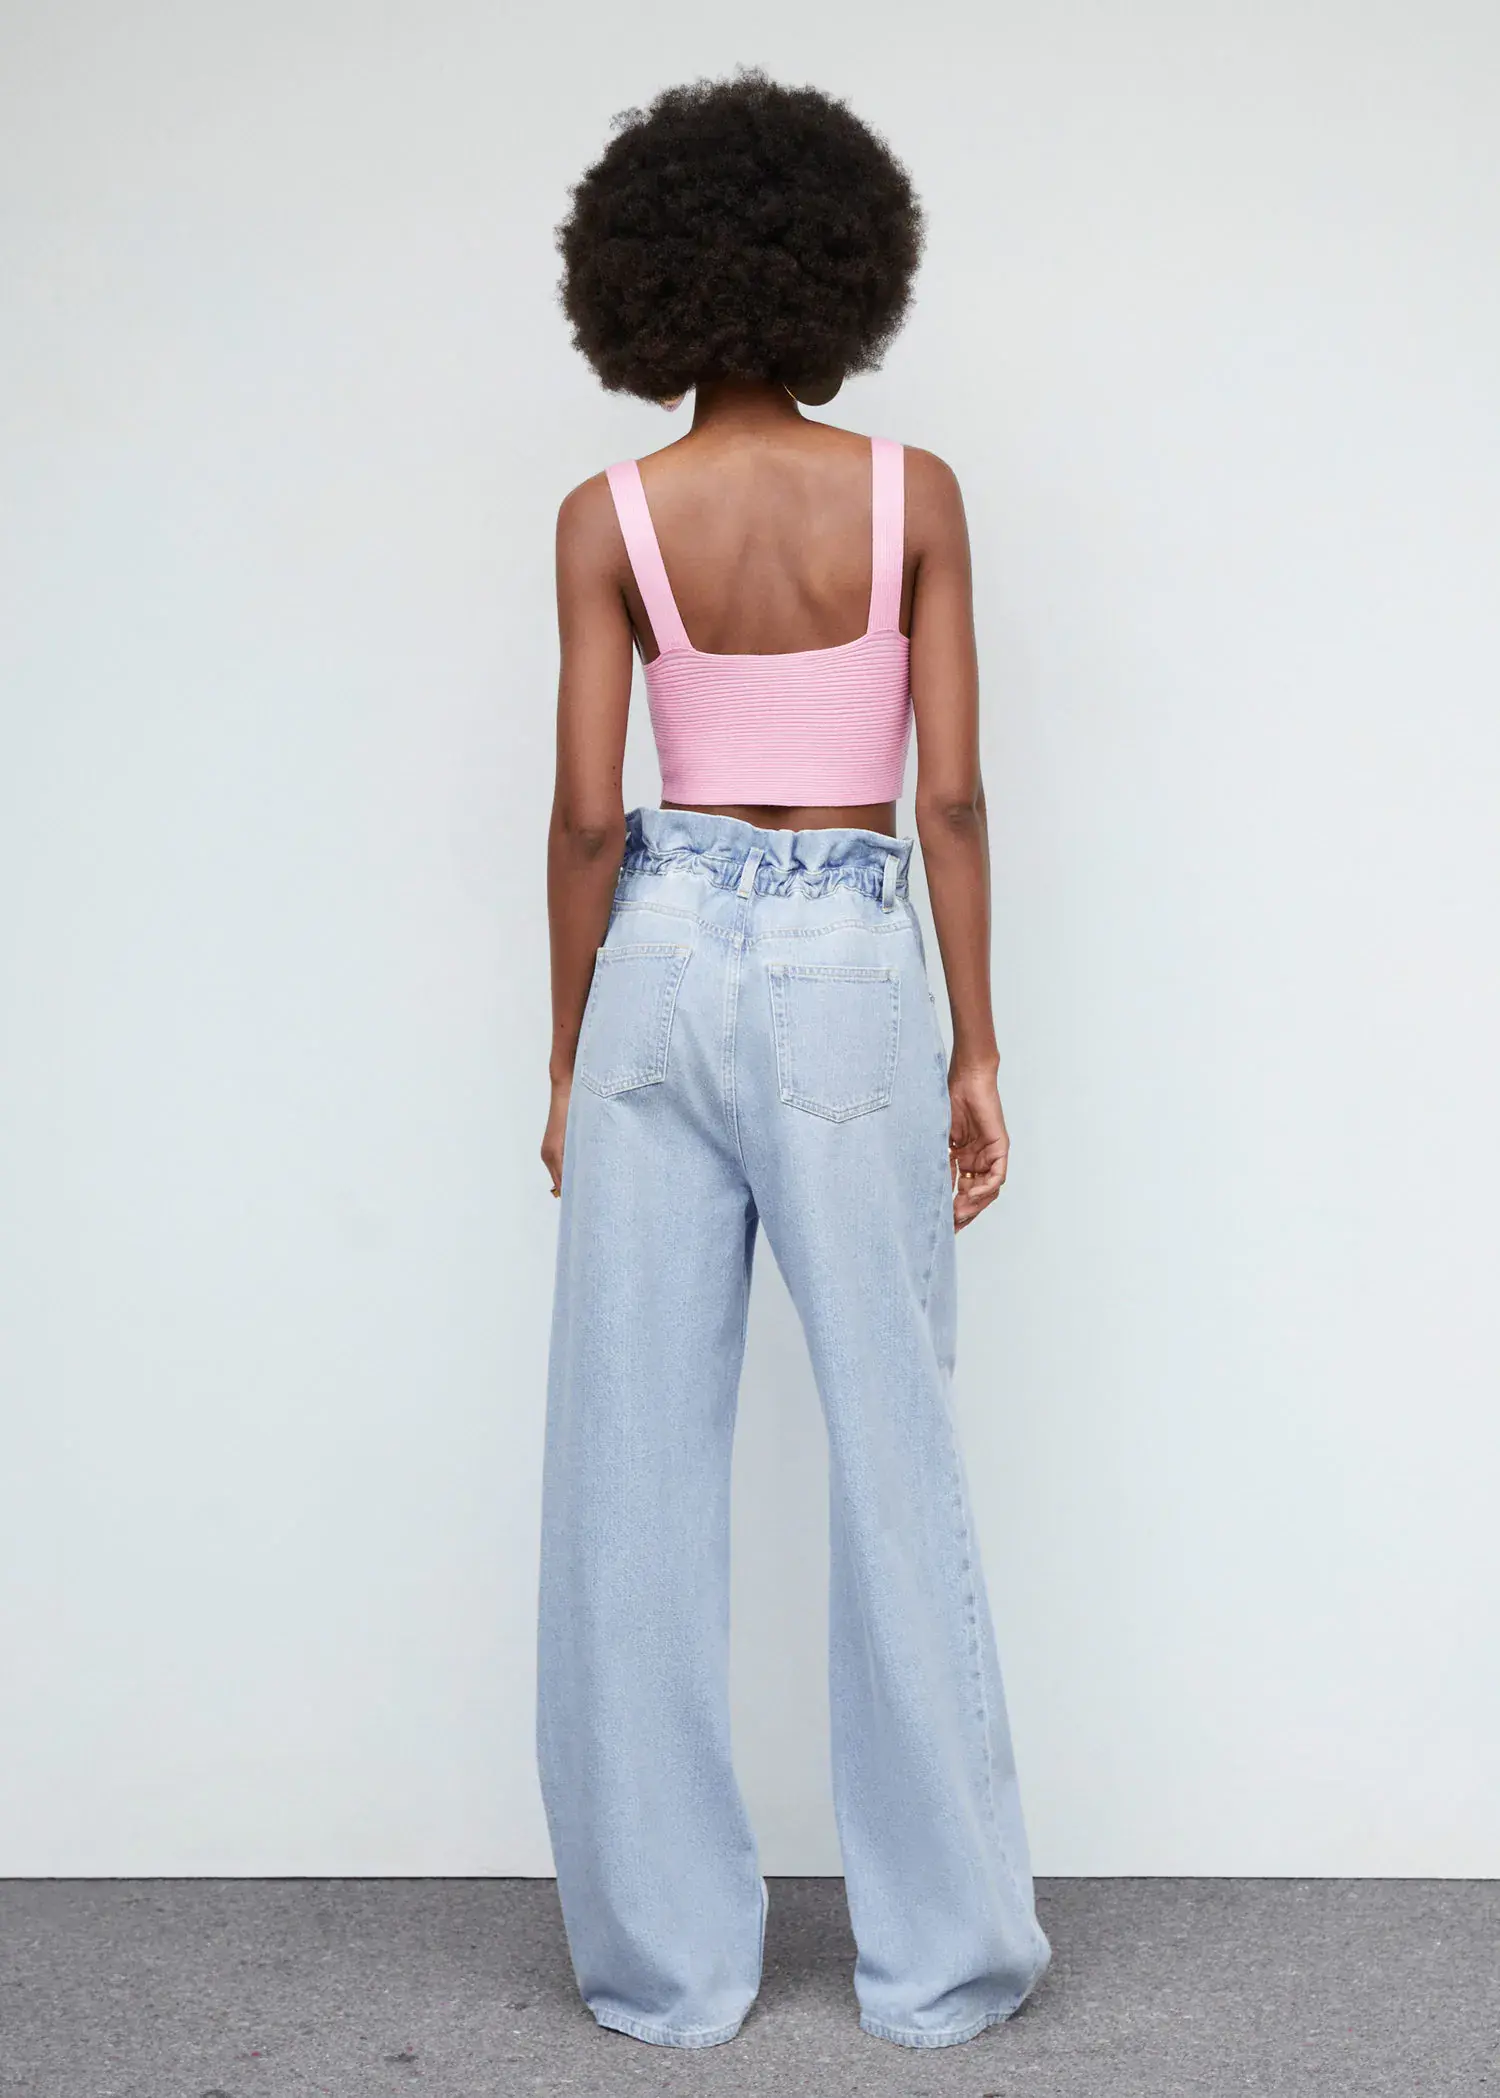 Mango Waist straight Slouchy jeans. a woman wearing a pink crop top and light blue jeans. 